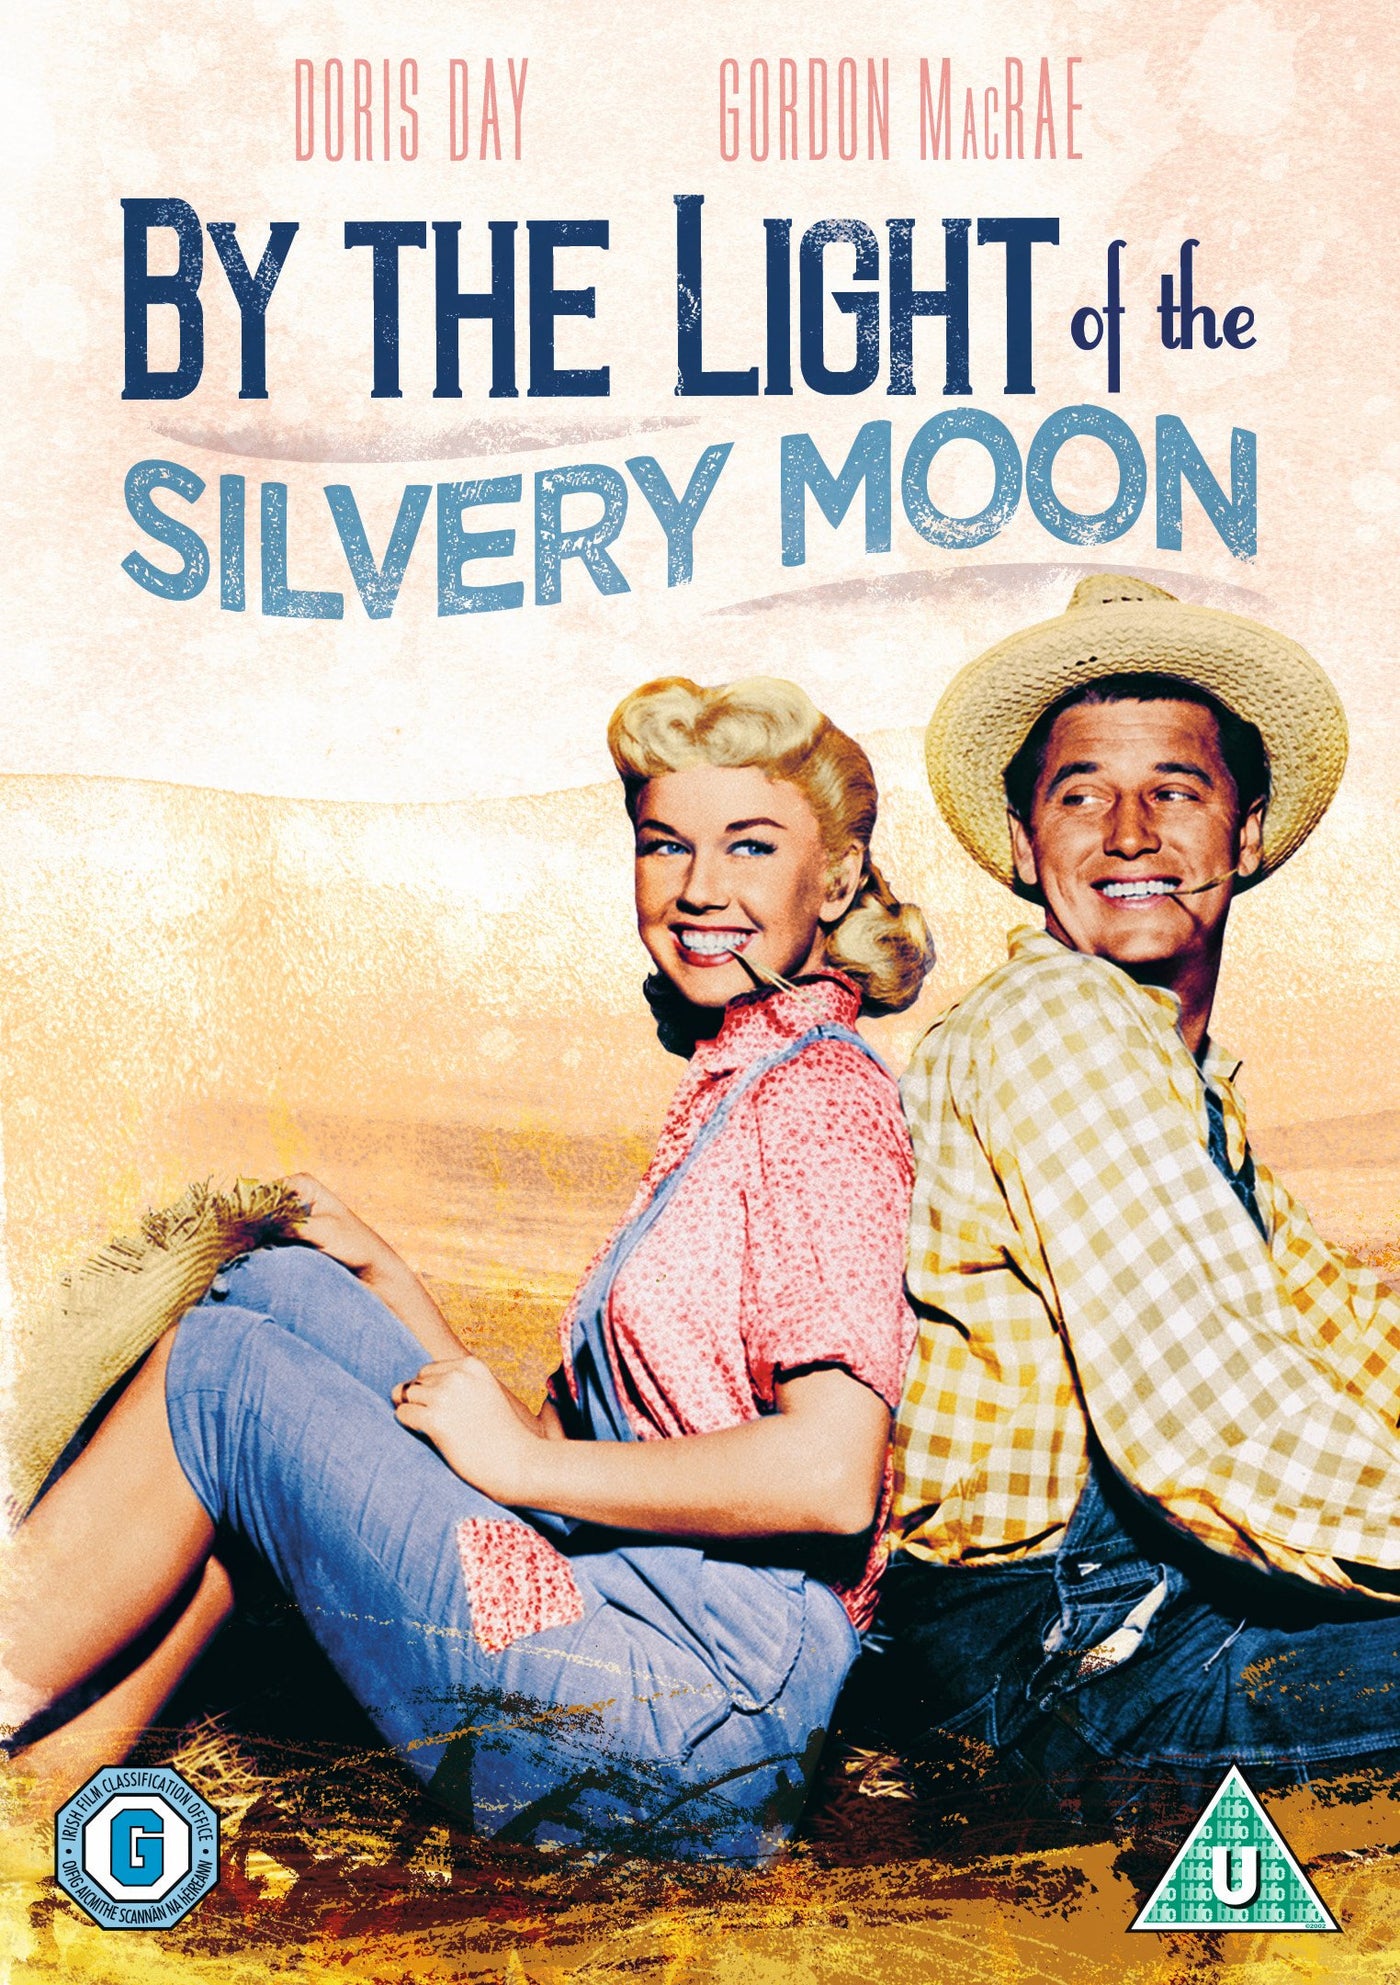 By The Light Of The Silvery Moon [1953] (DVD)